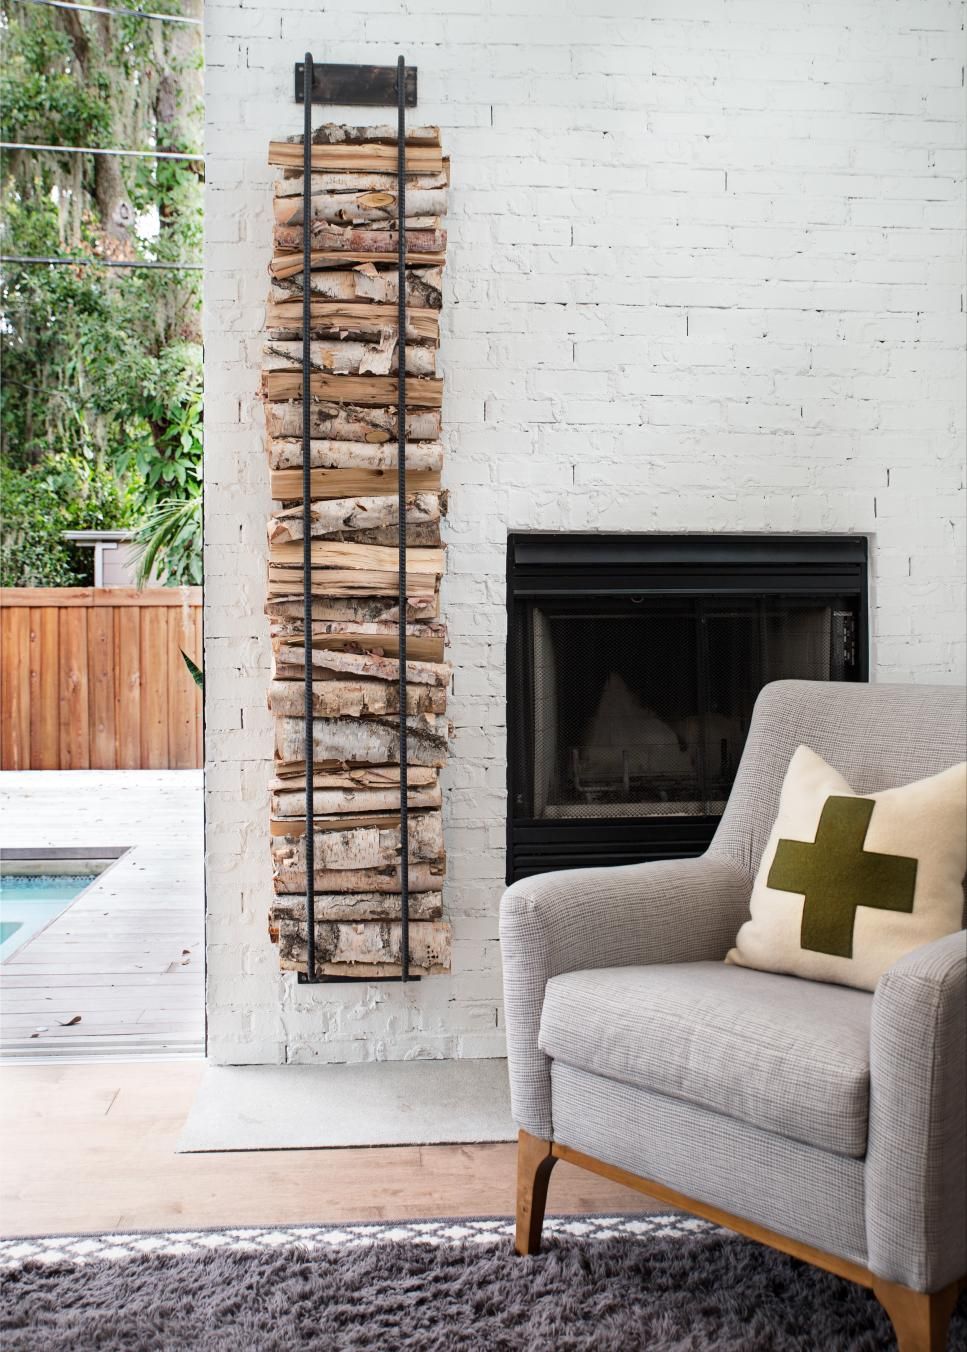 Fireplace Showcase Luxury How to Decorate with Firewood